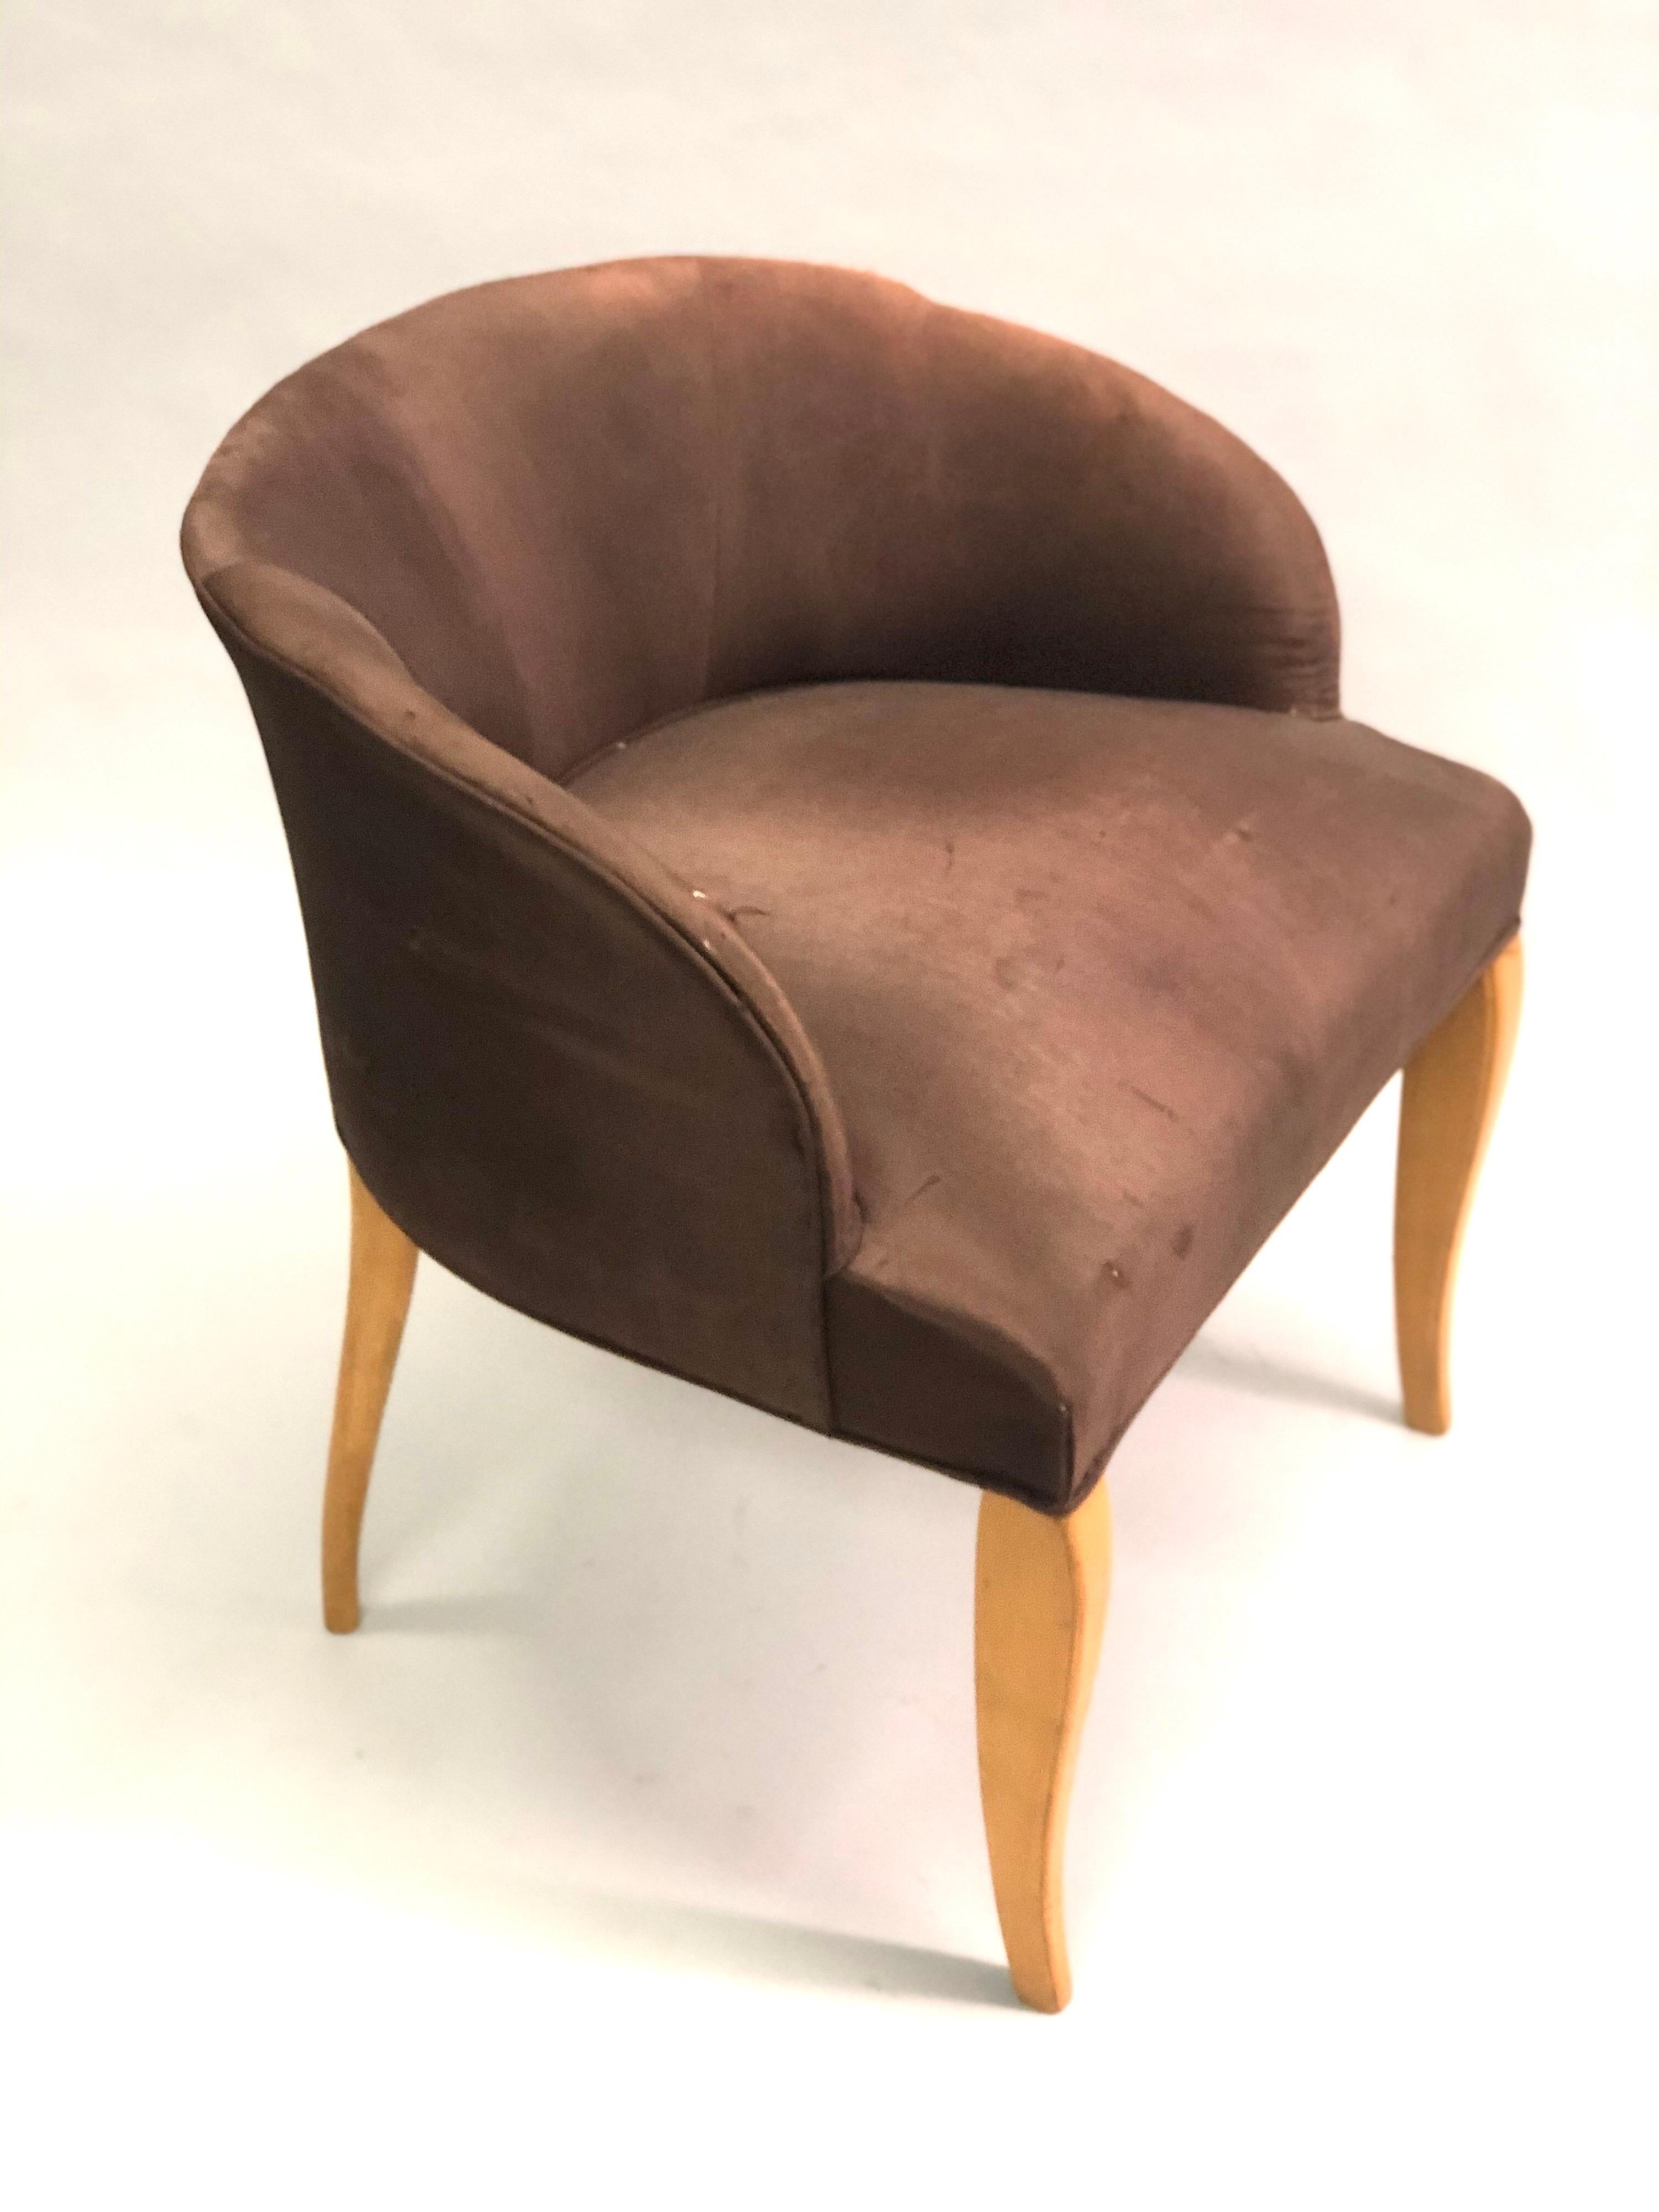 20th Century French / Belgian Art Deco Vanity Chair by Van der Borcht Freres, 1925-1930 For Sale